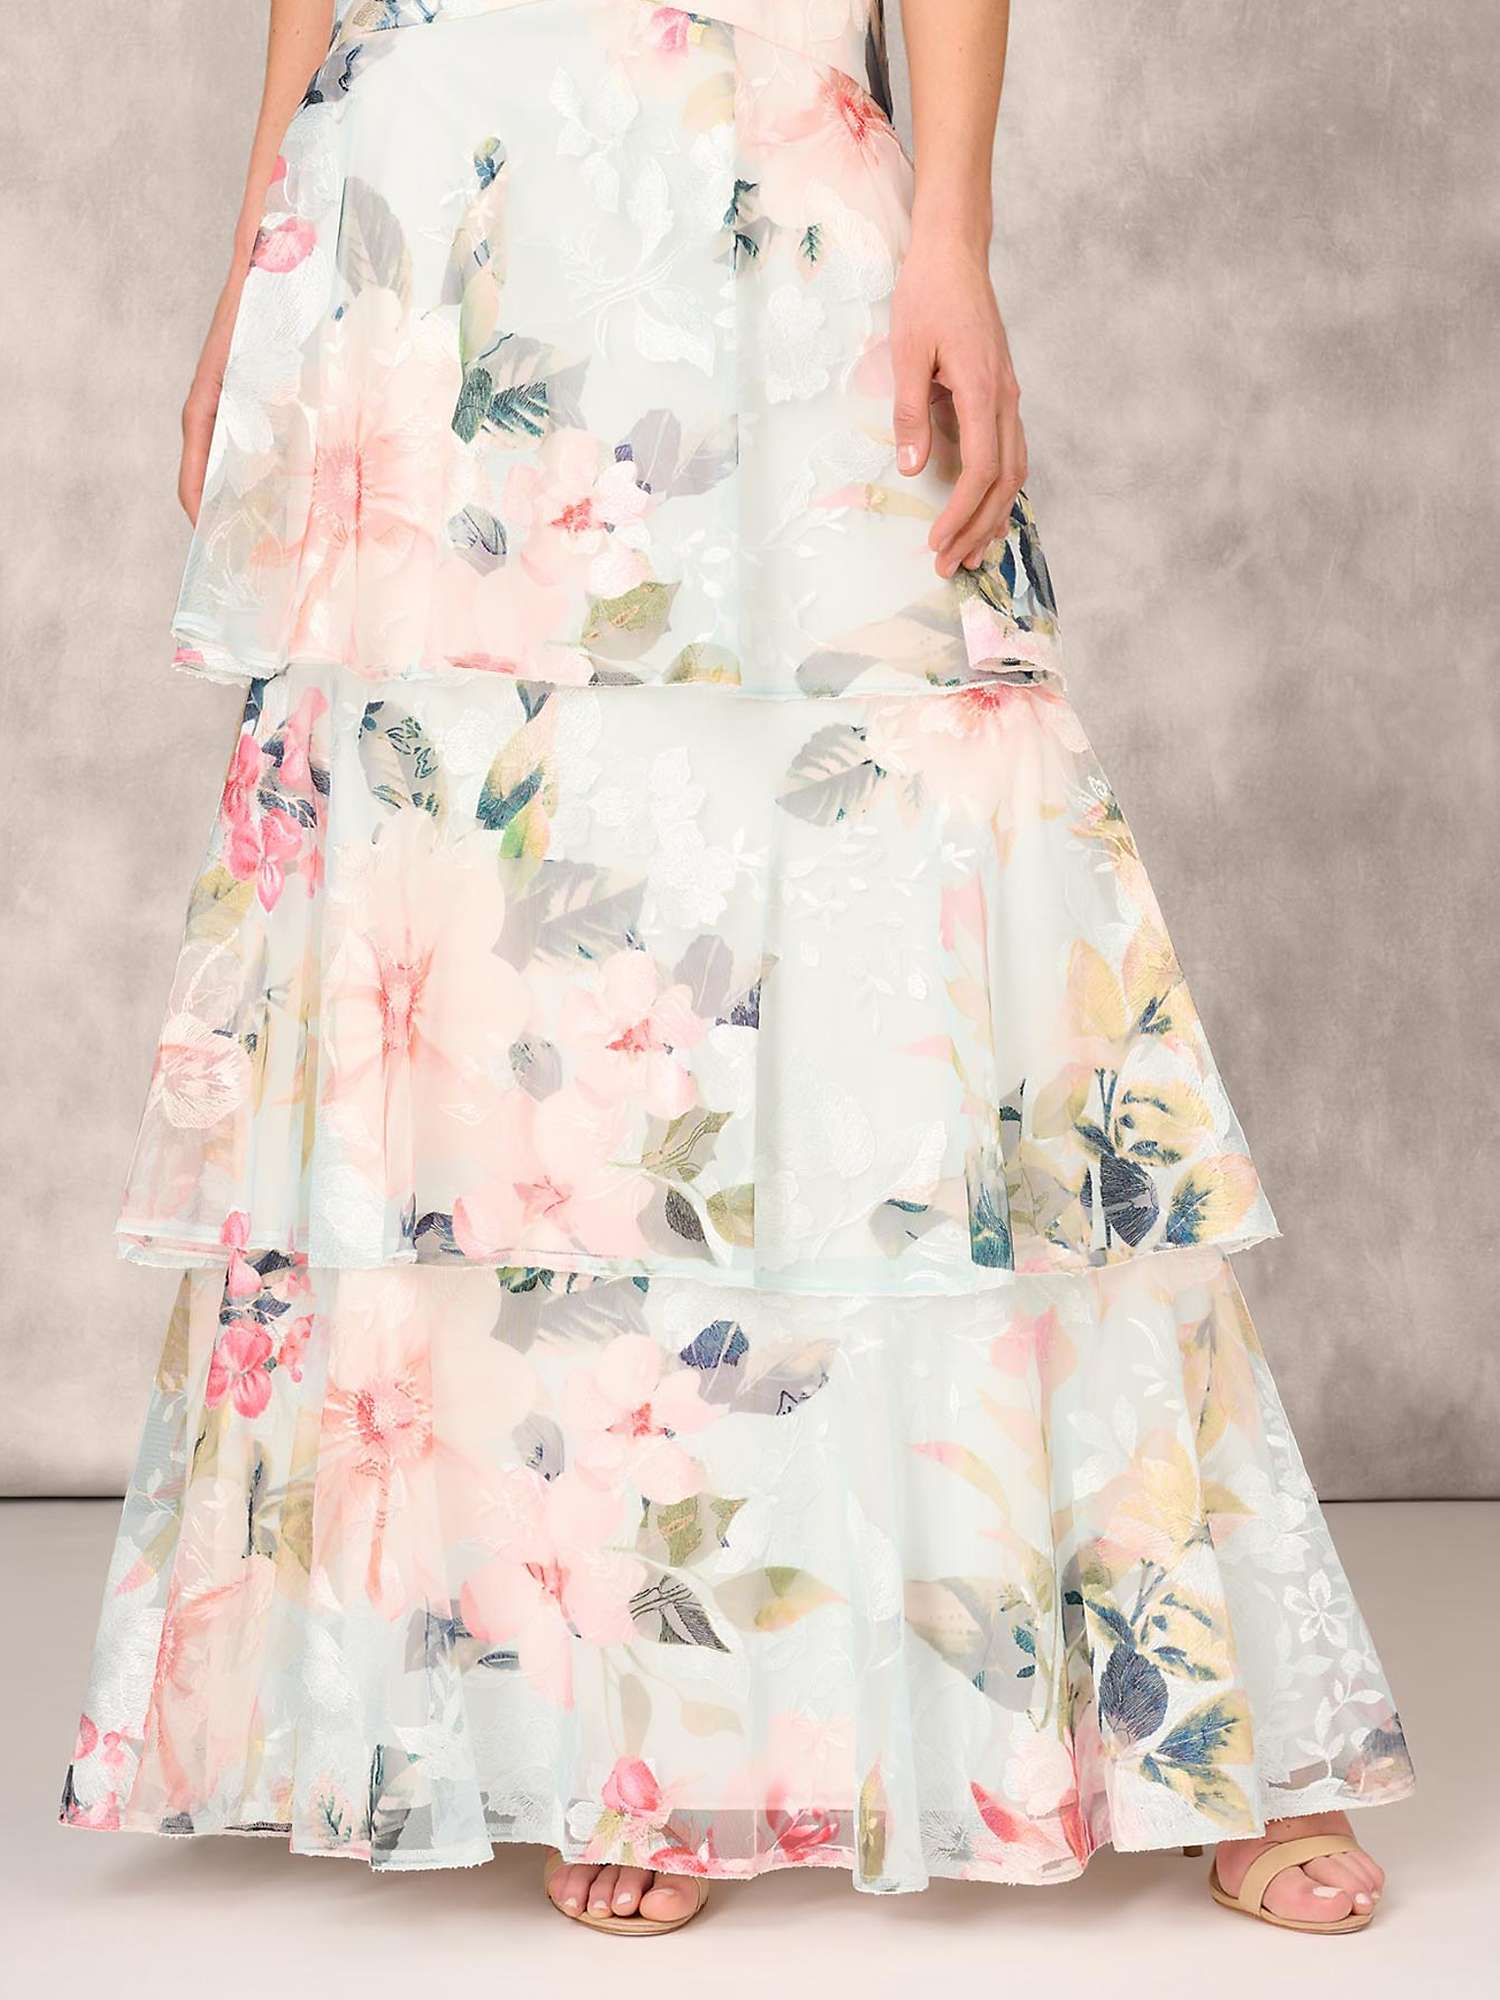 Buy Aidan Mattox by Adrianna Papell Floral Embroidery Tiered Maxi Dress, Blue/Multi Online at johnlewis.com